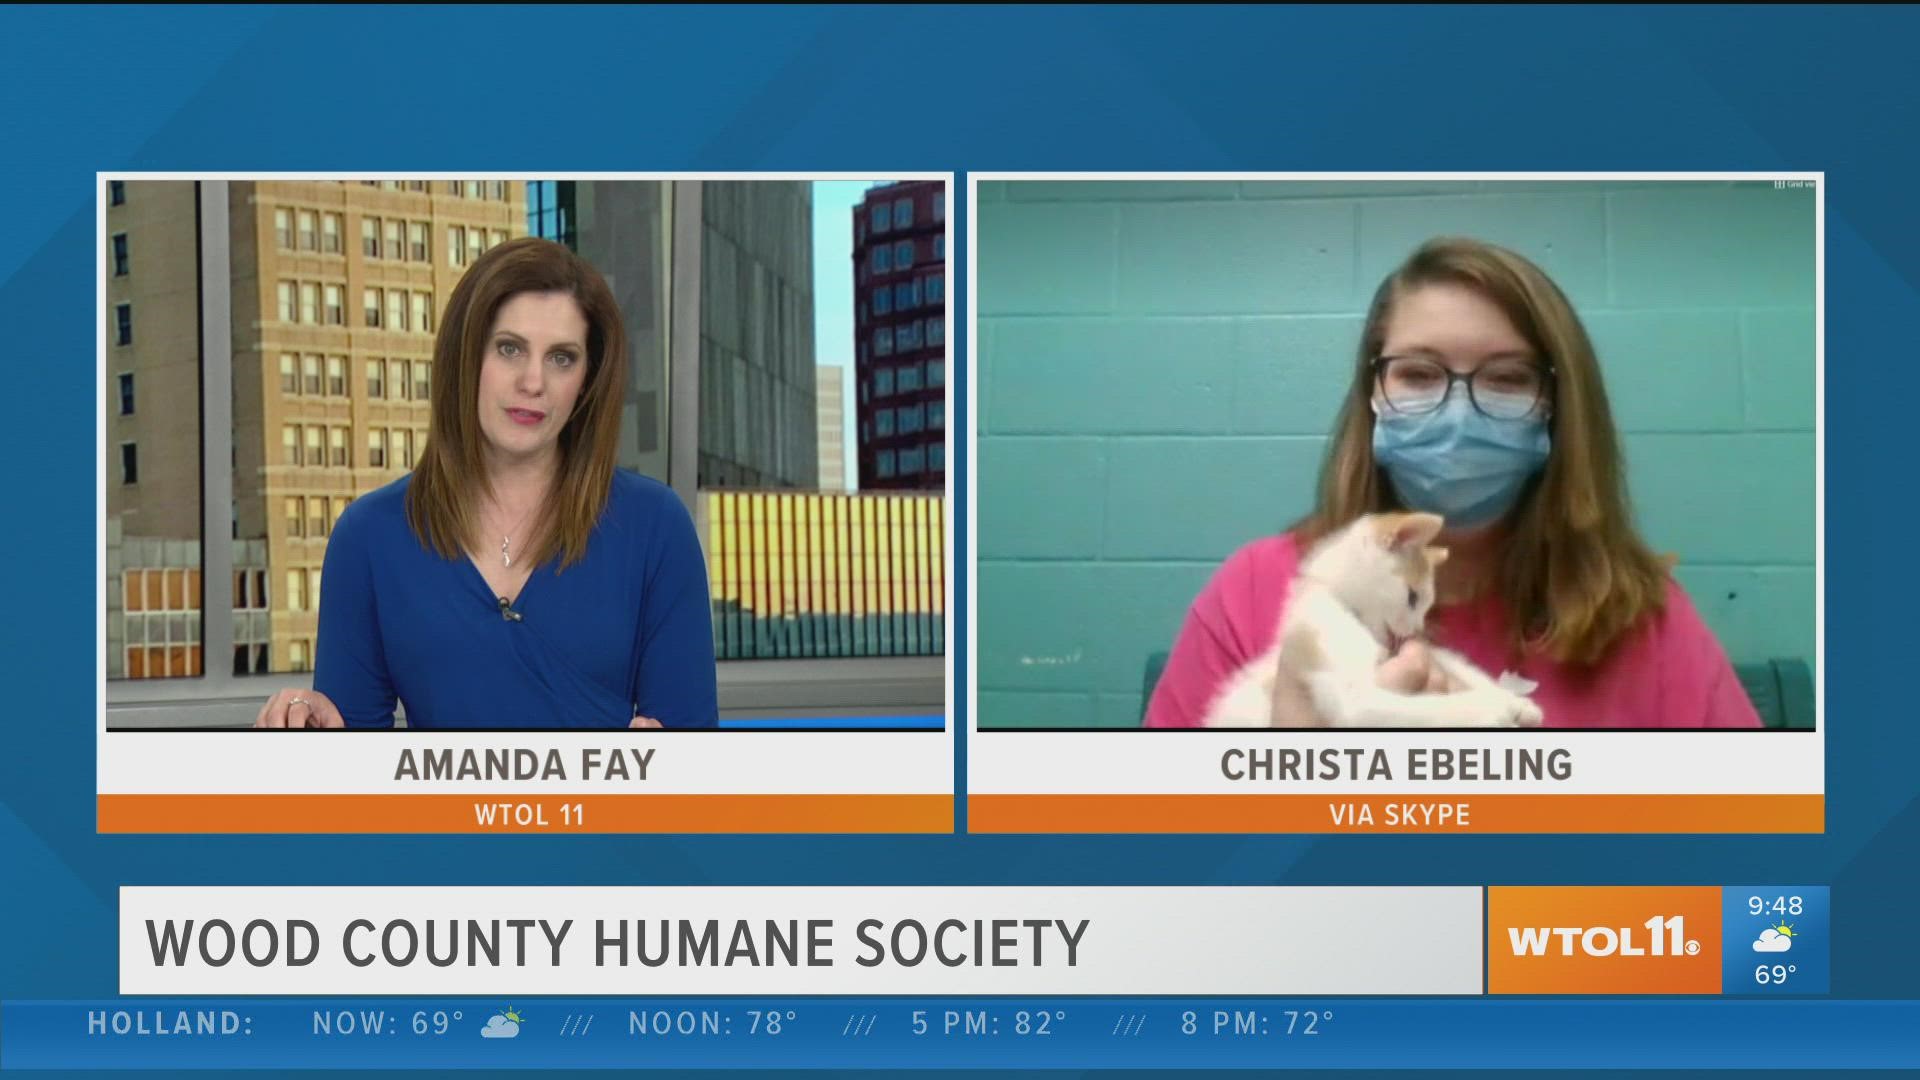 If you’re missing a furry companion in your life, the Wood County Humane Society can help you find your furr-ever friend!